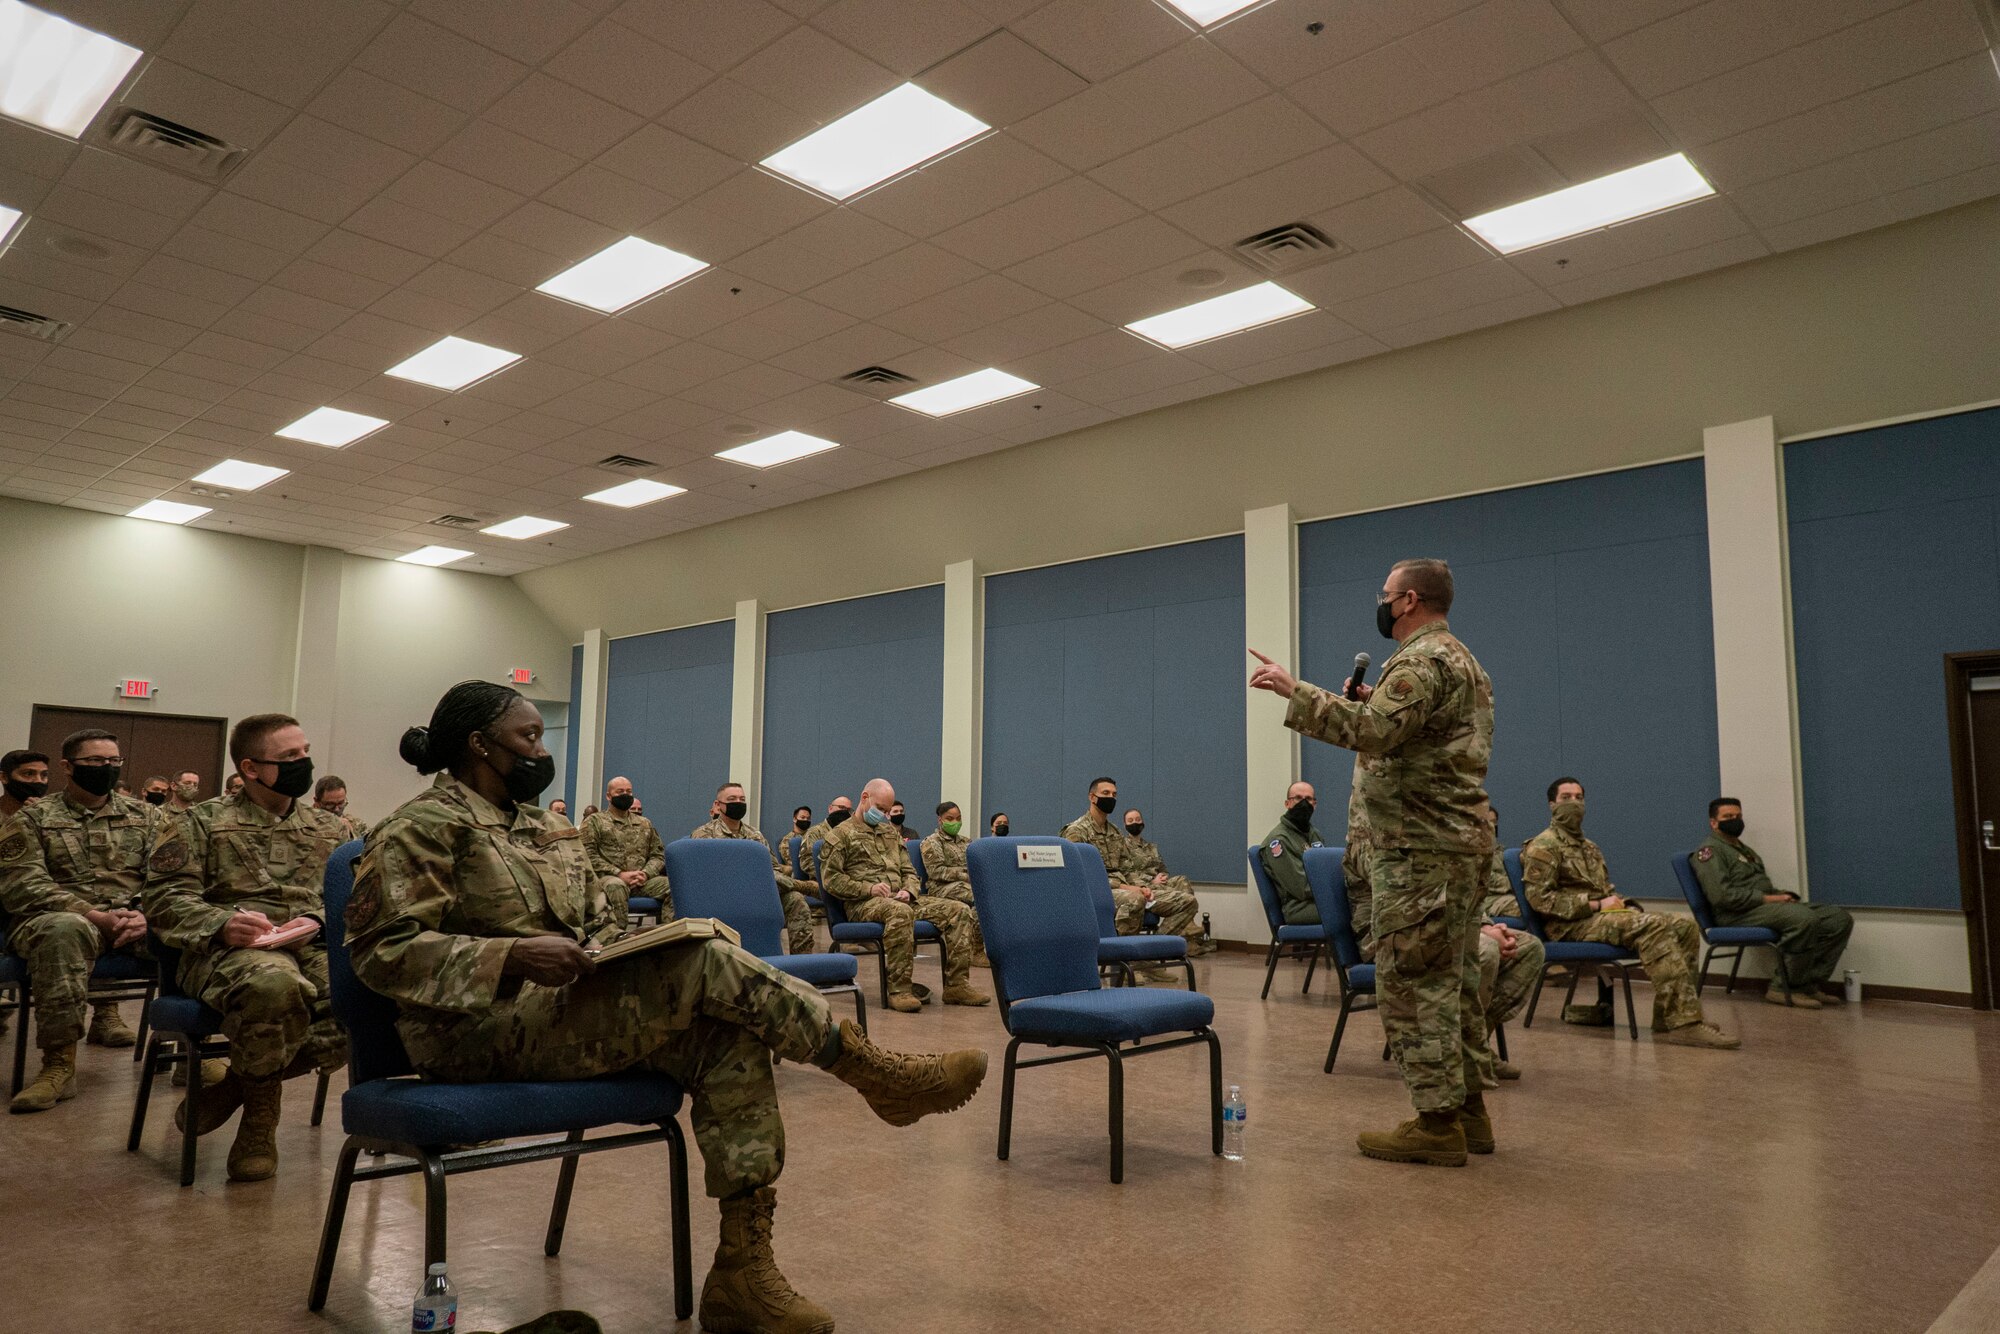 Chief Master Sgt. David Wade, command chief of Air Combat Command, speaks to enlisted members during an enlisted call in the base auditorium.